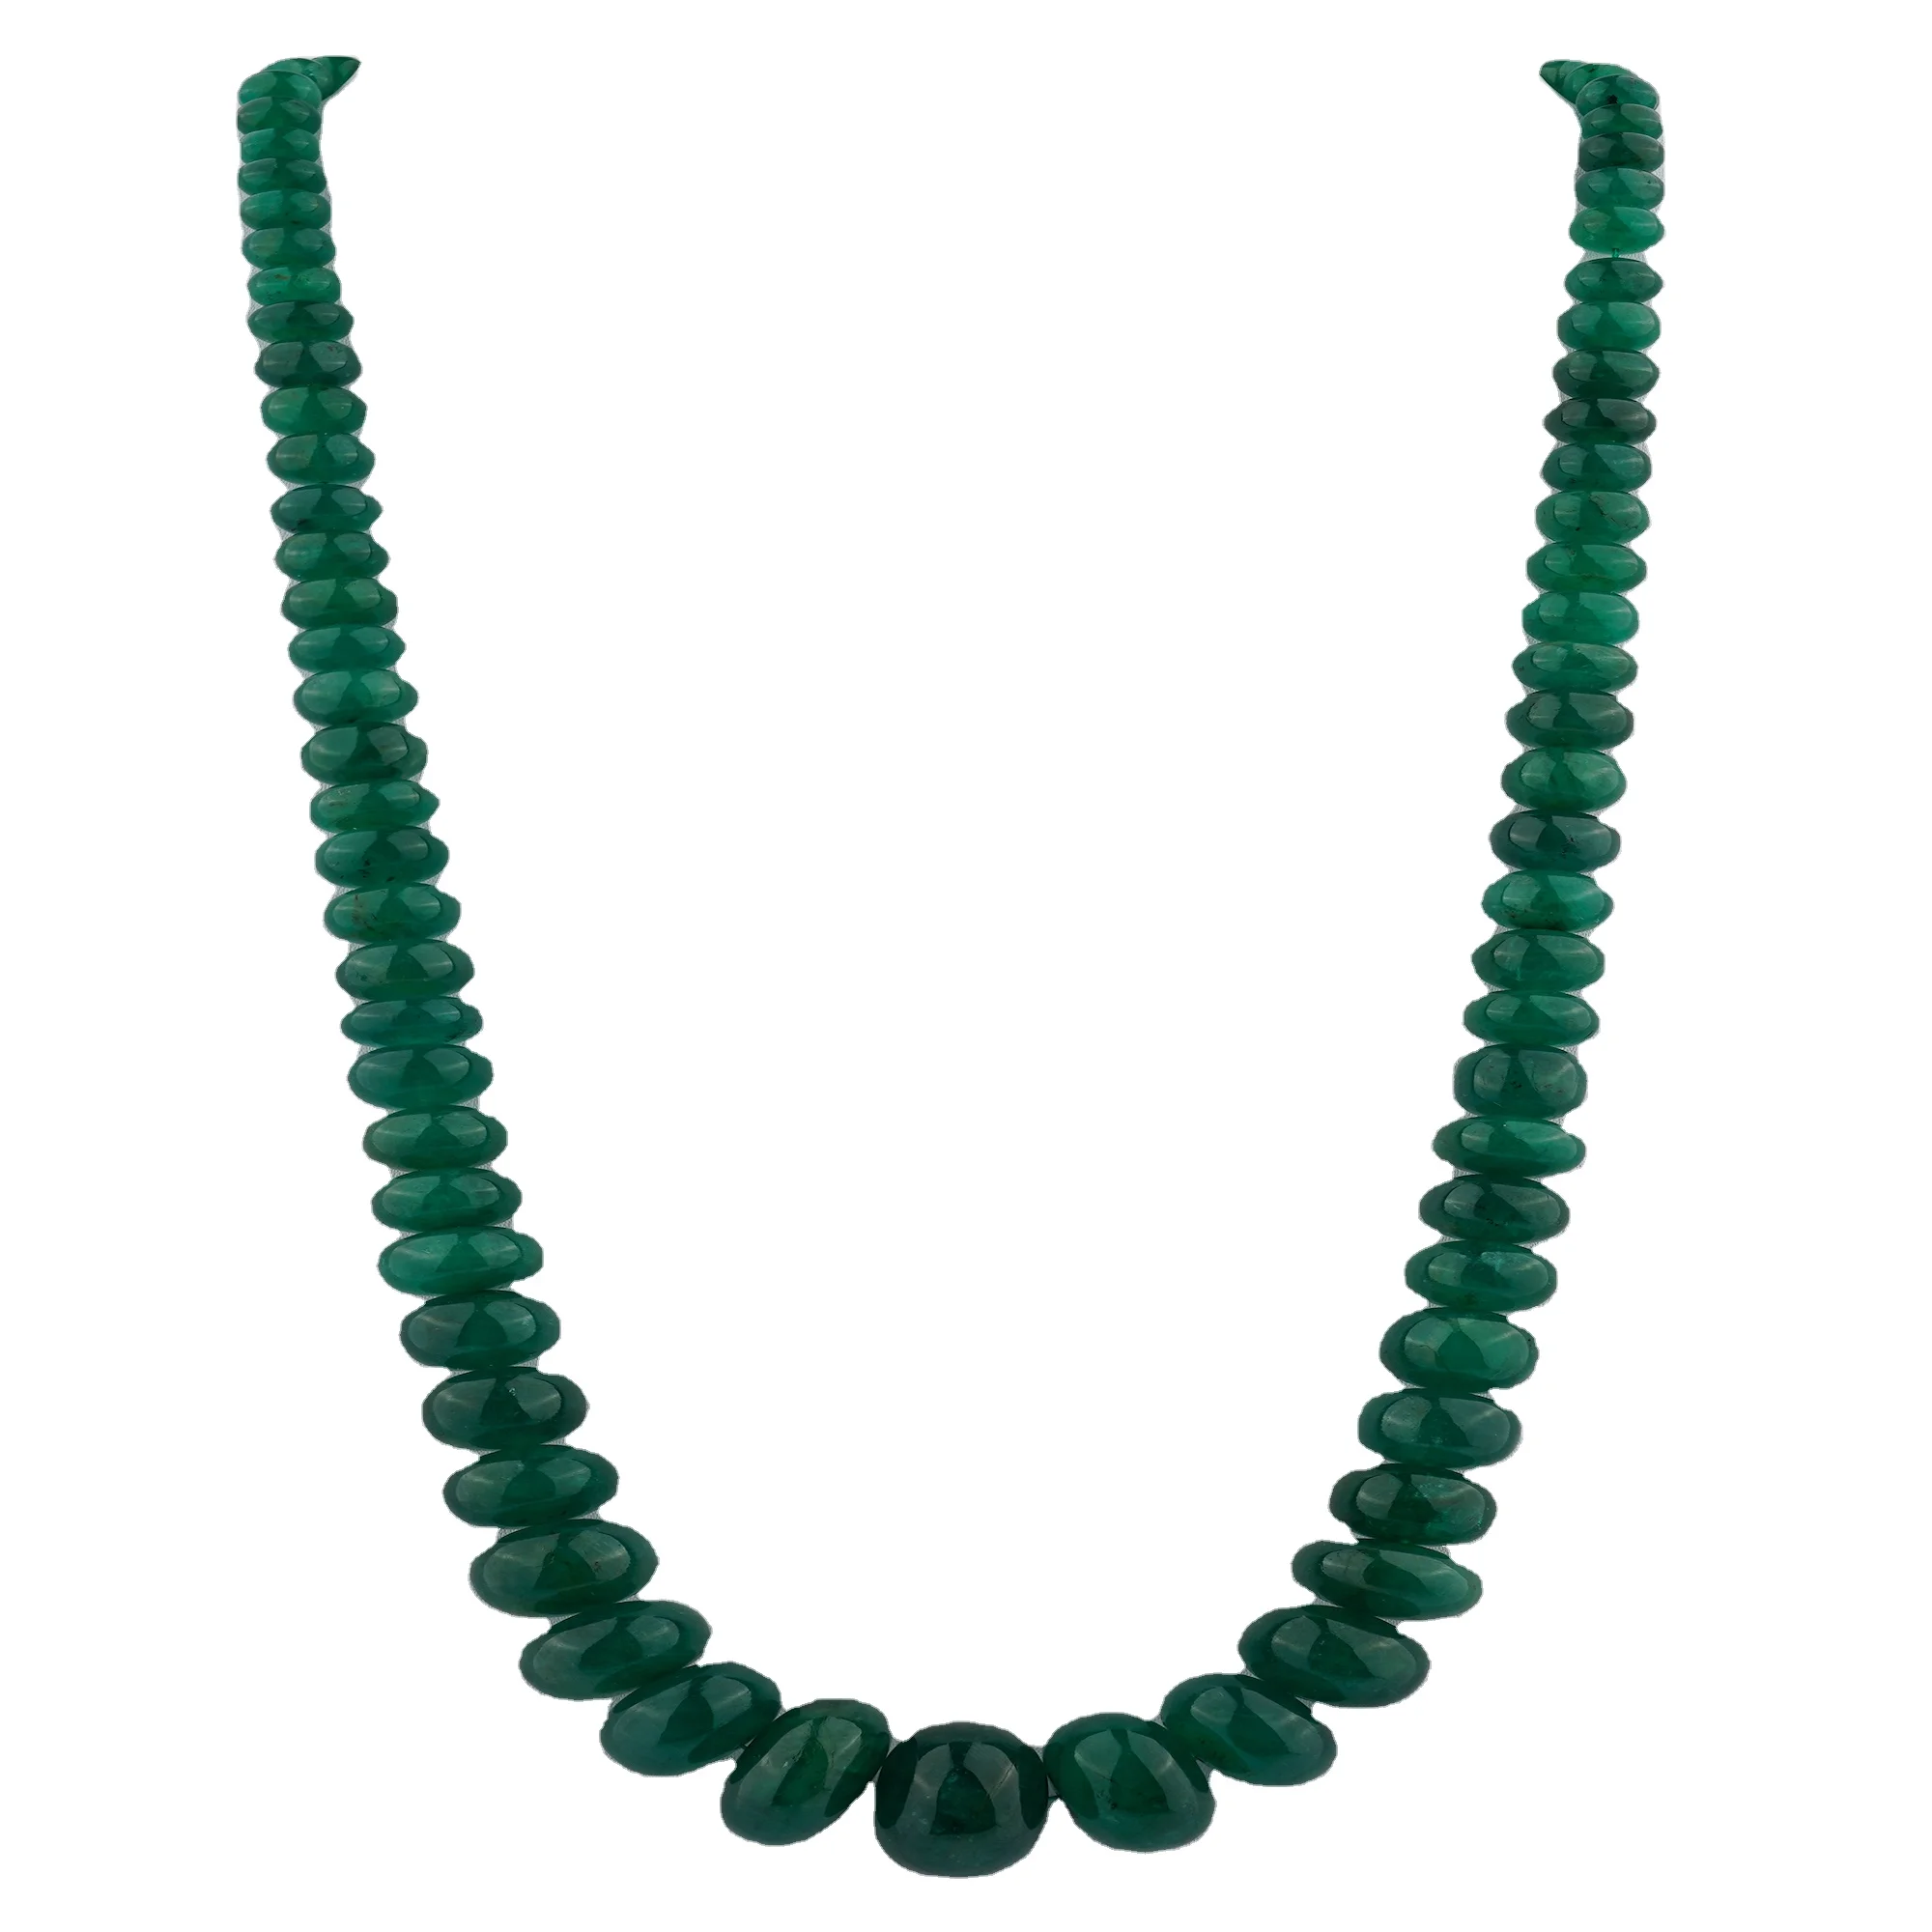 WORLD CLASS RARE 996.00 CTS NATURAL 4 STRAND GREEN EMERALD ROUND BEADS NECKLACE 